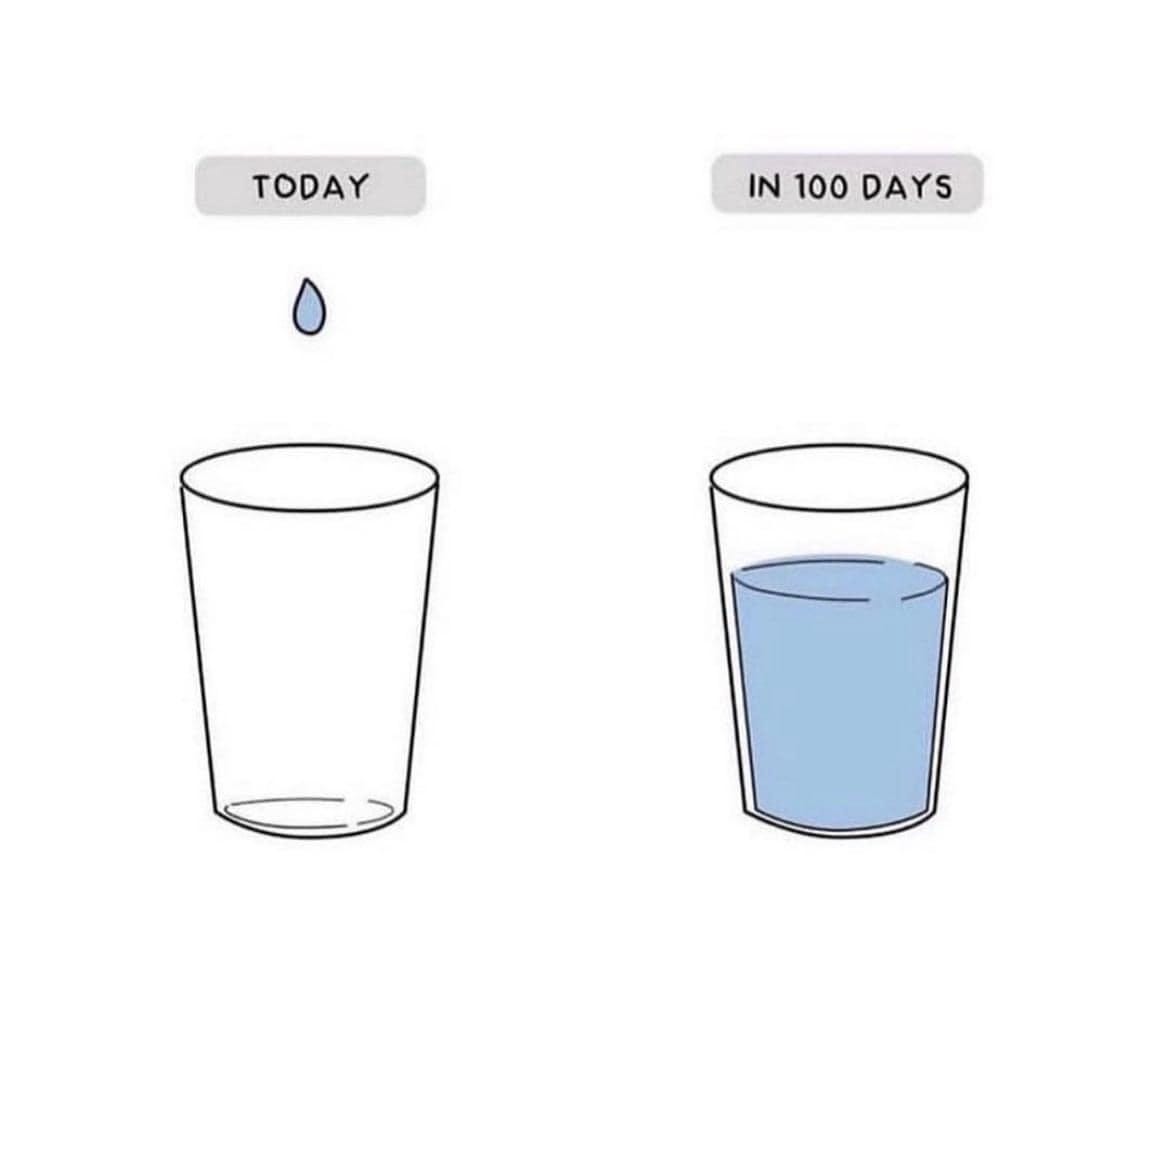 May be an image of drink, body of water and text